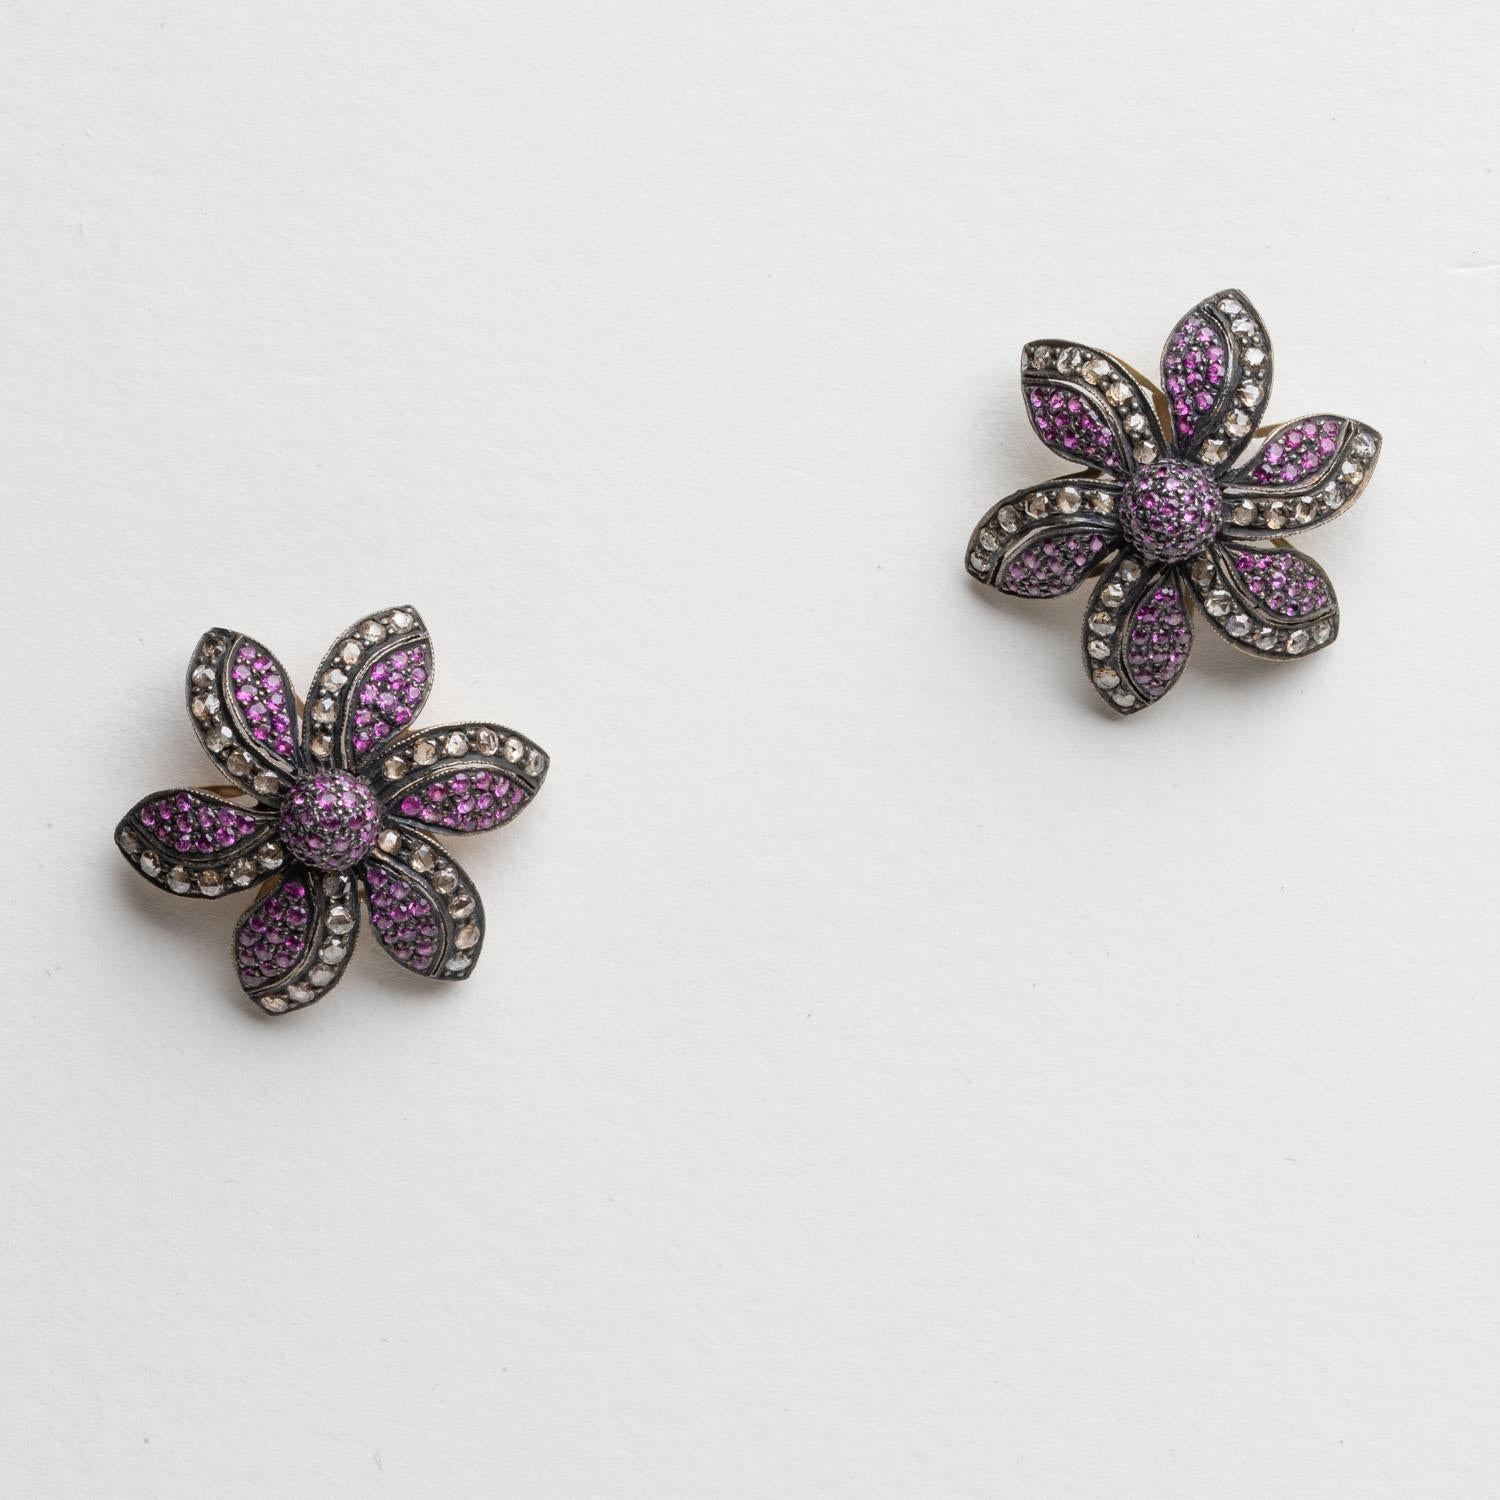 A dramatic pair of floral-motif stud earrings featuring pave`-set round, brilliant cut Burmese pink rubies and diamonds.  18K gold backs for pierced ears.  Rhodium plated over sterling silver.